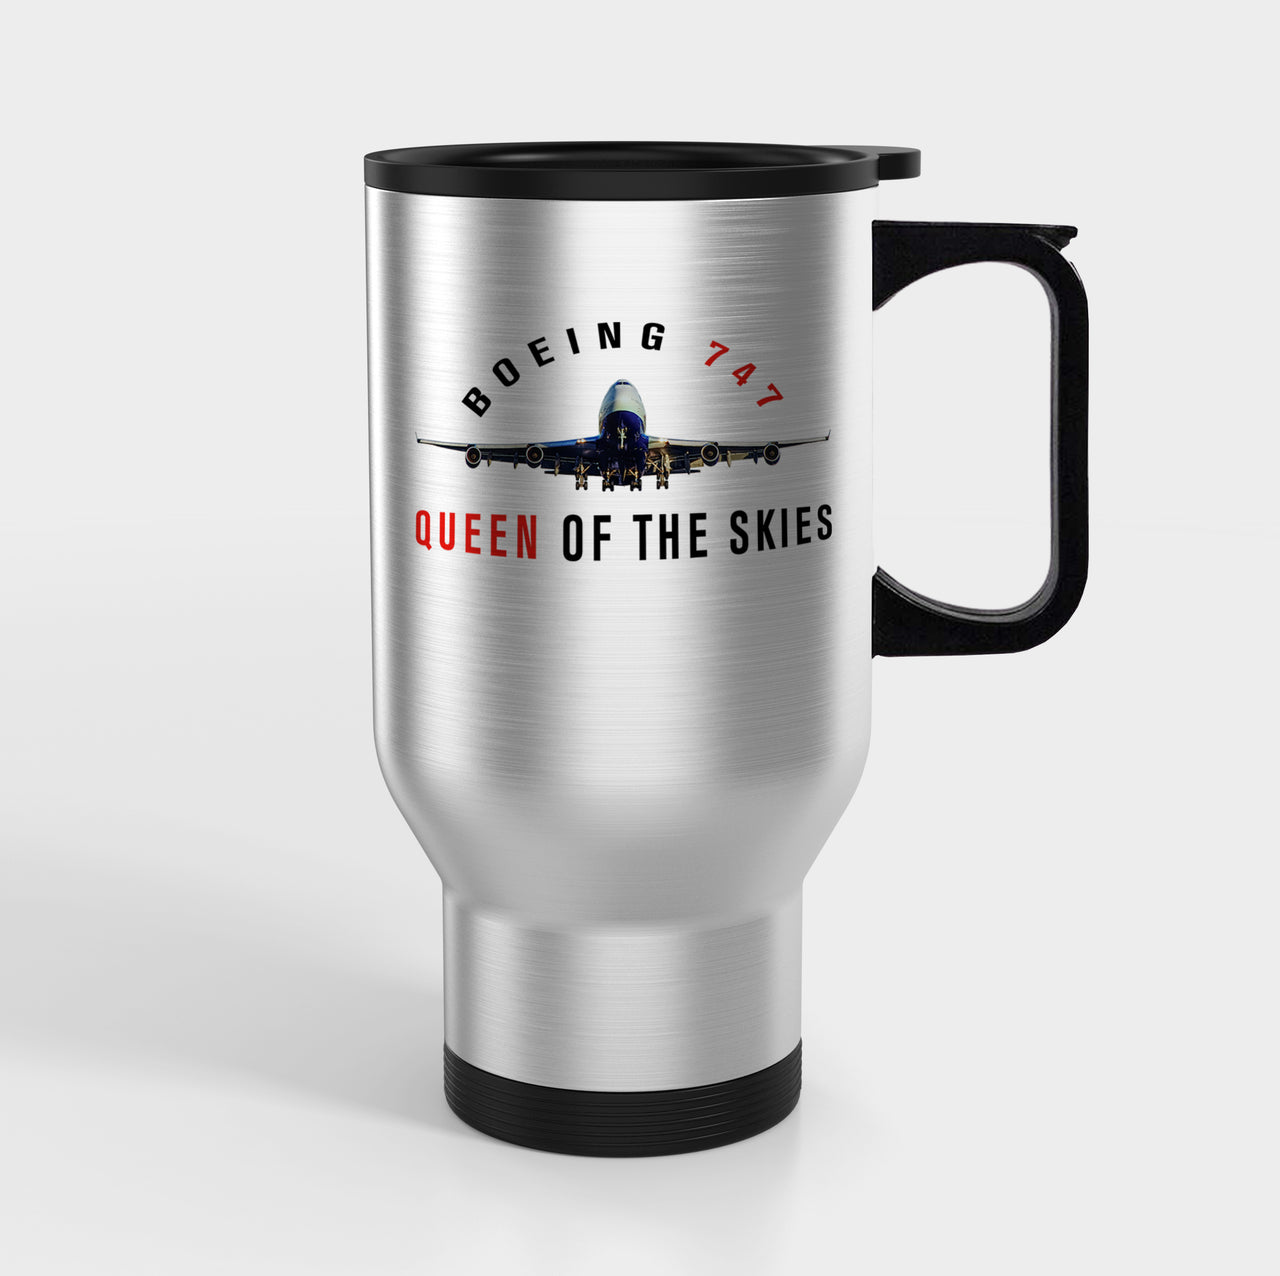 Boeing 747 Queen of the Skies Designed Travel Mugs (With Holder)